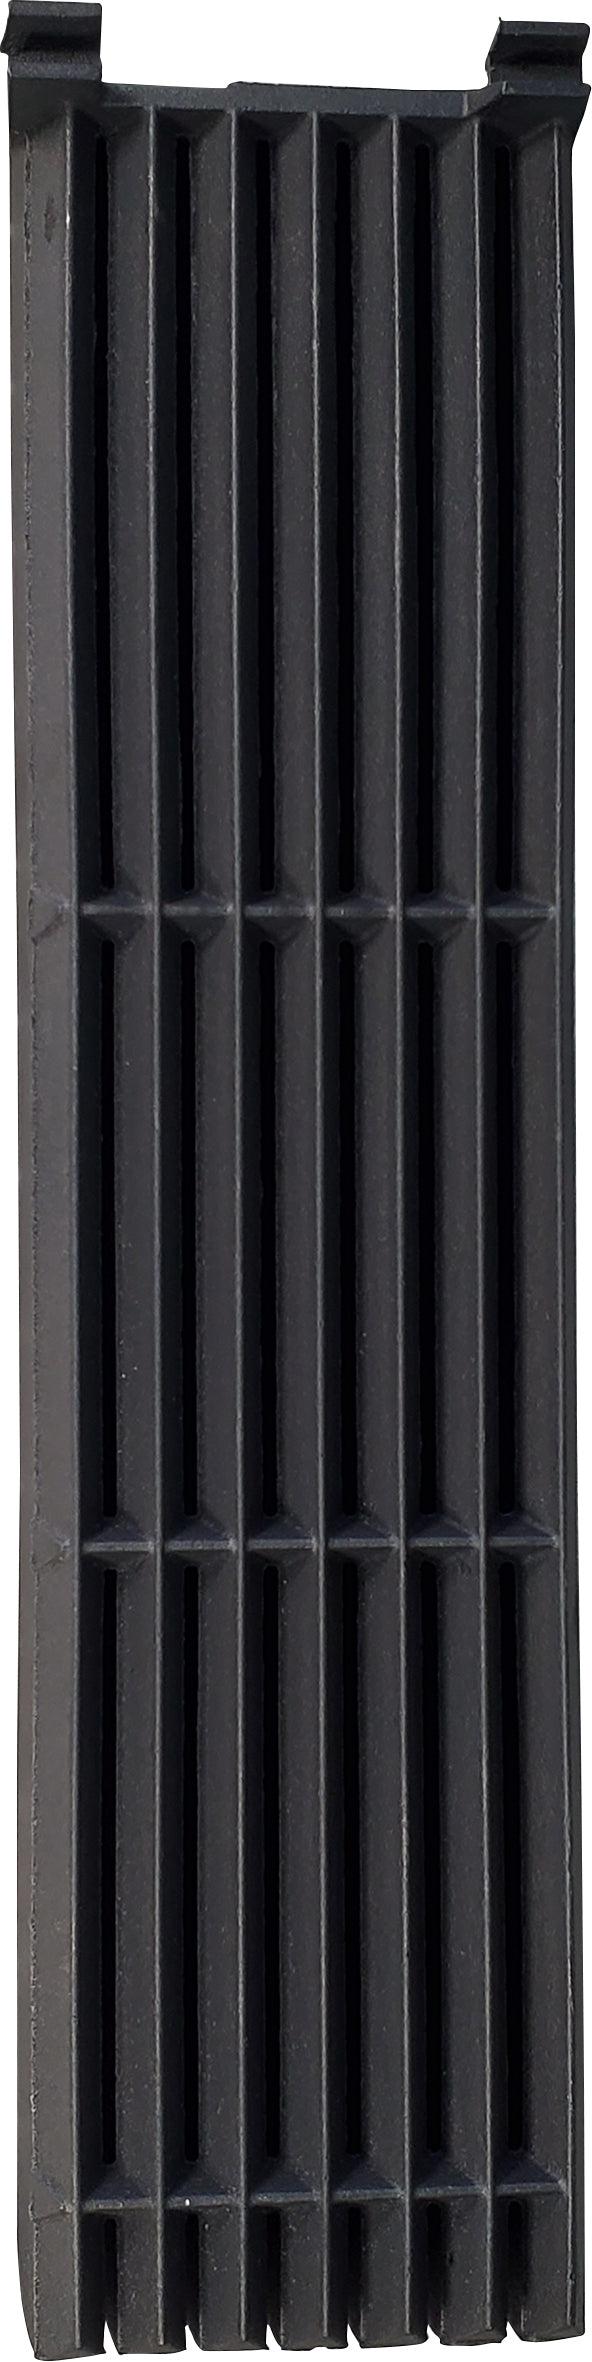 Pro-Kitchen - Charbroiler Replacement Grill